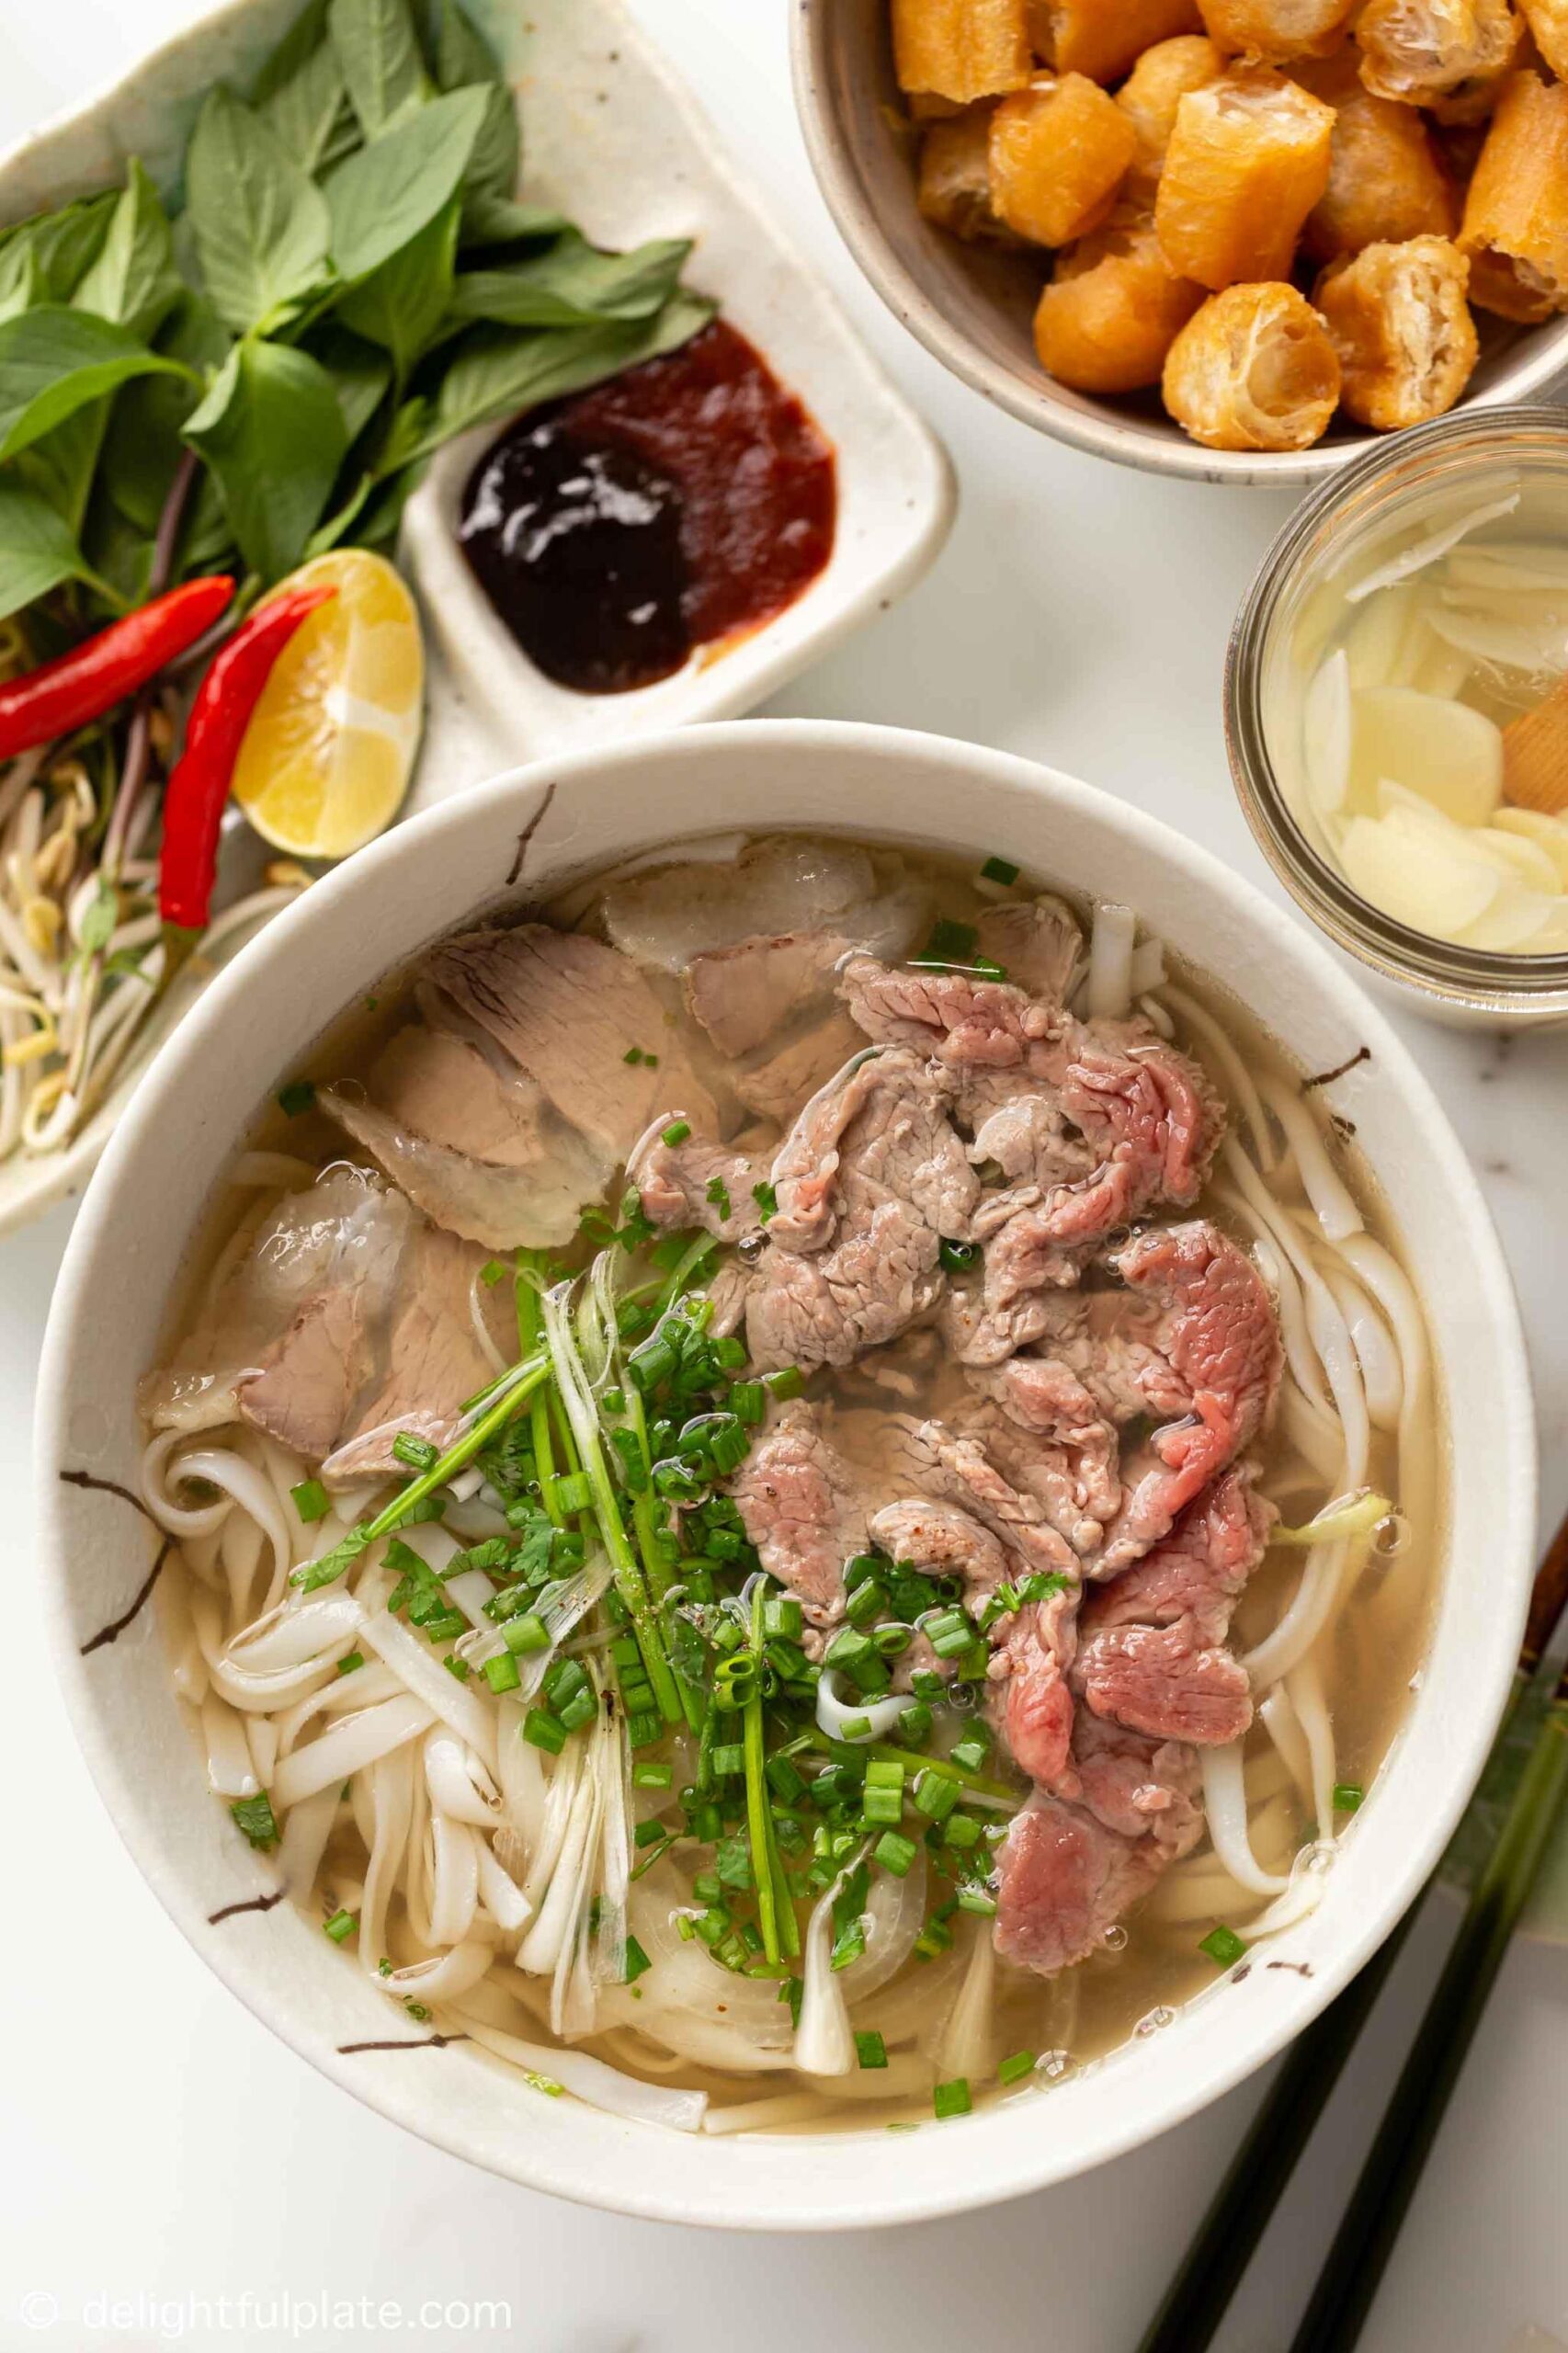  Let the aroma of star anise and cinnamon fill your kitchen as you prepare this beloved Vietnamese classic.